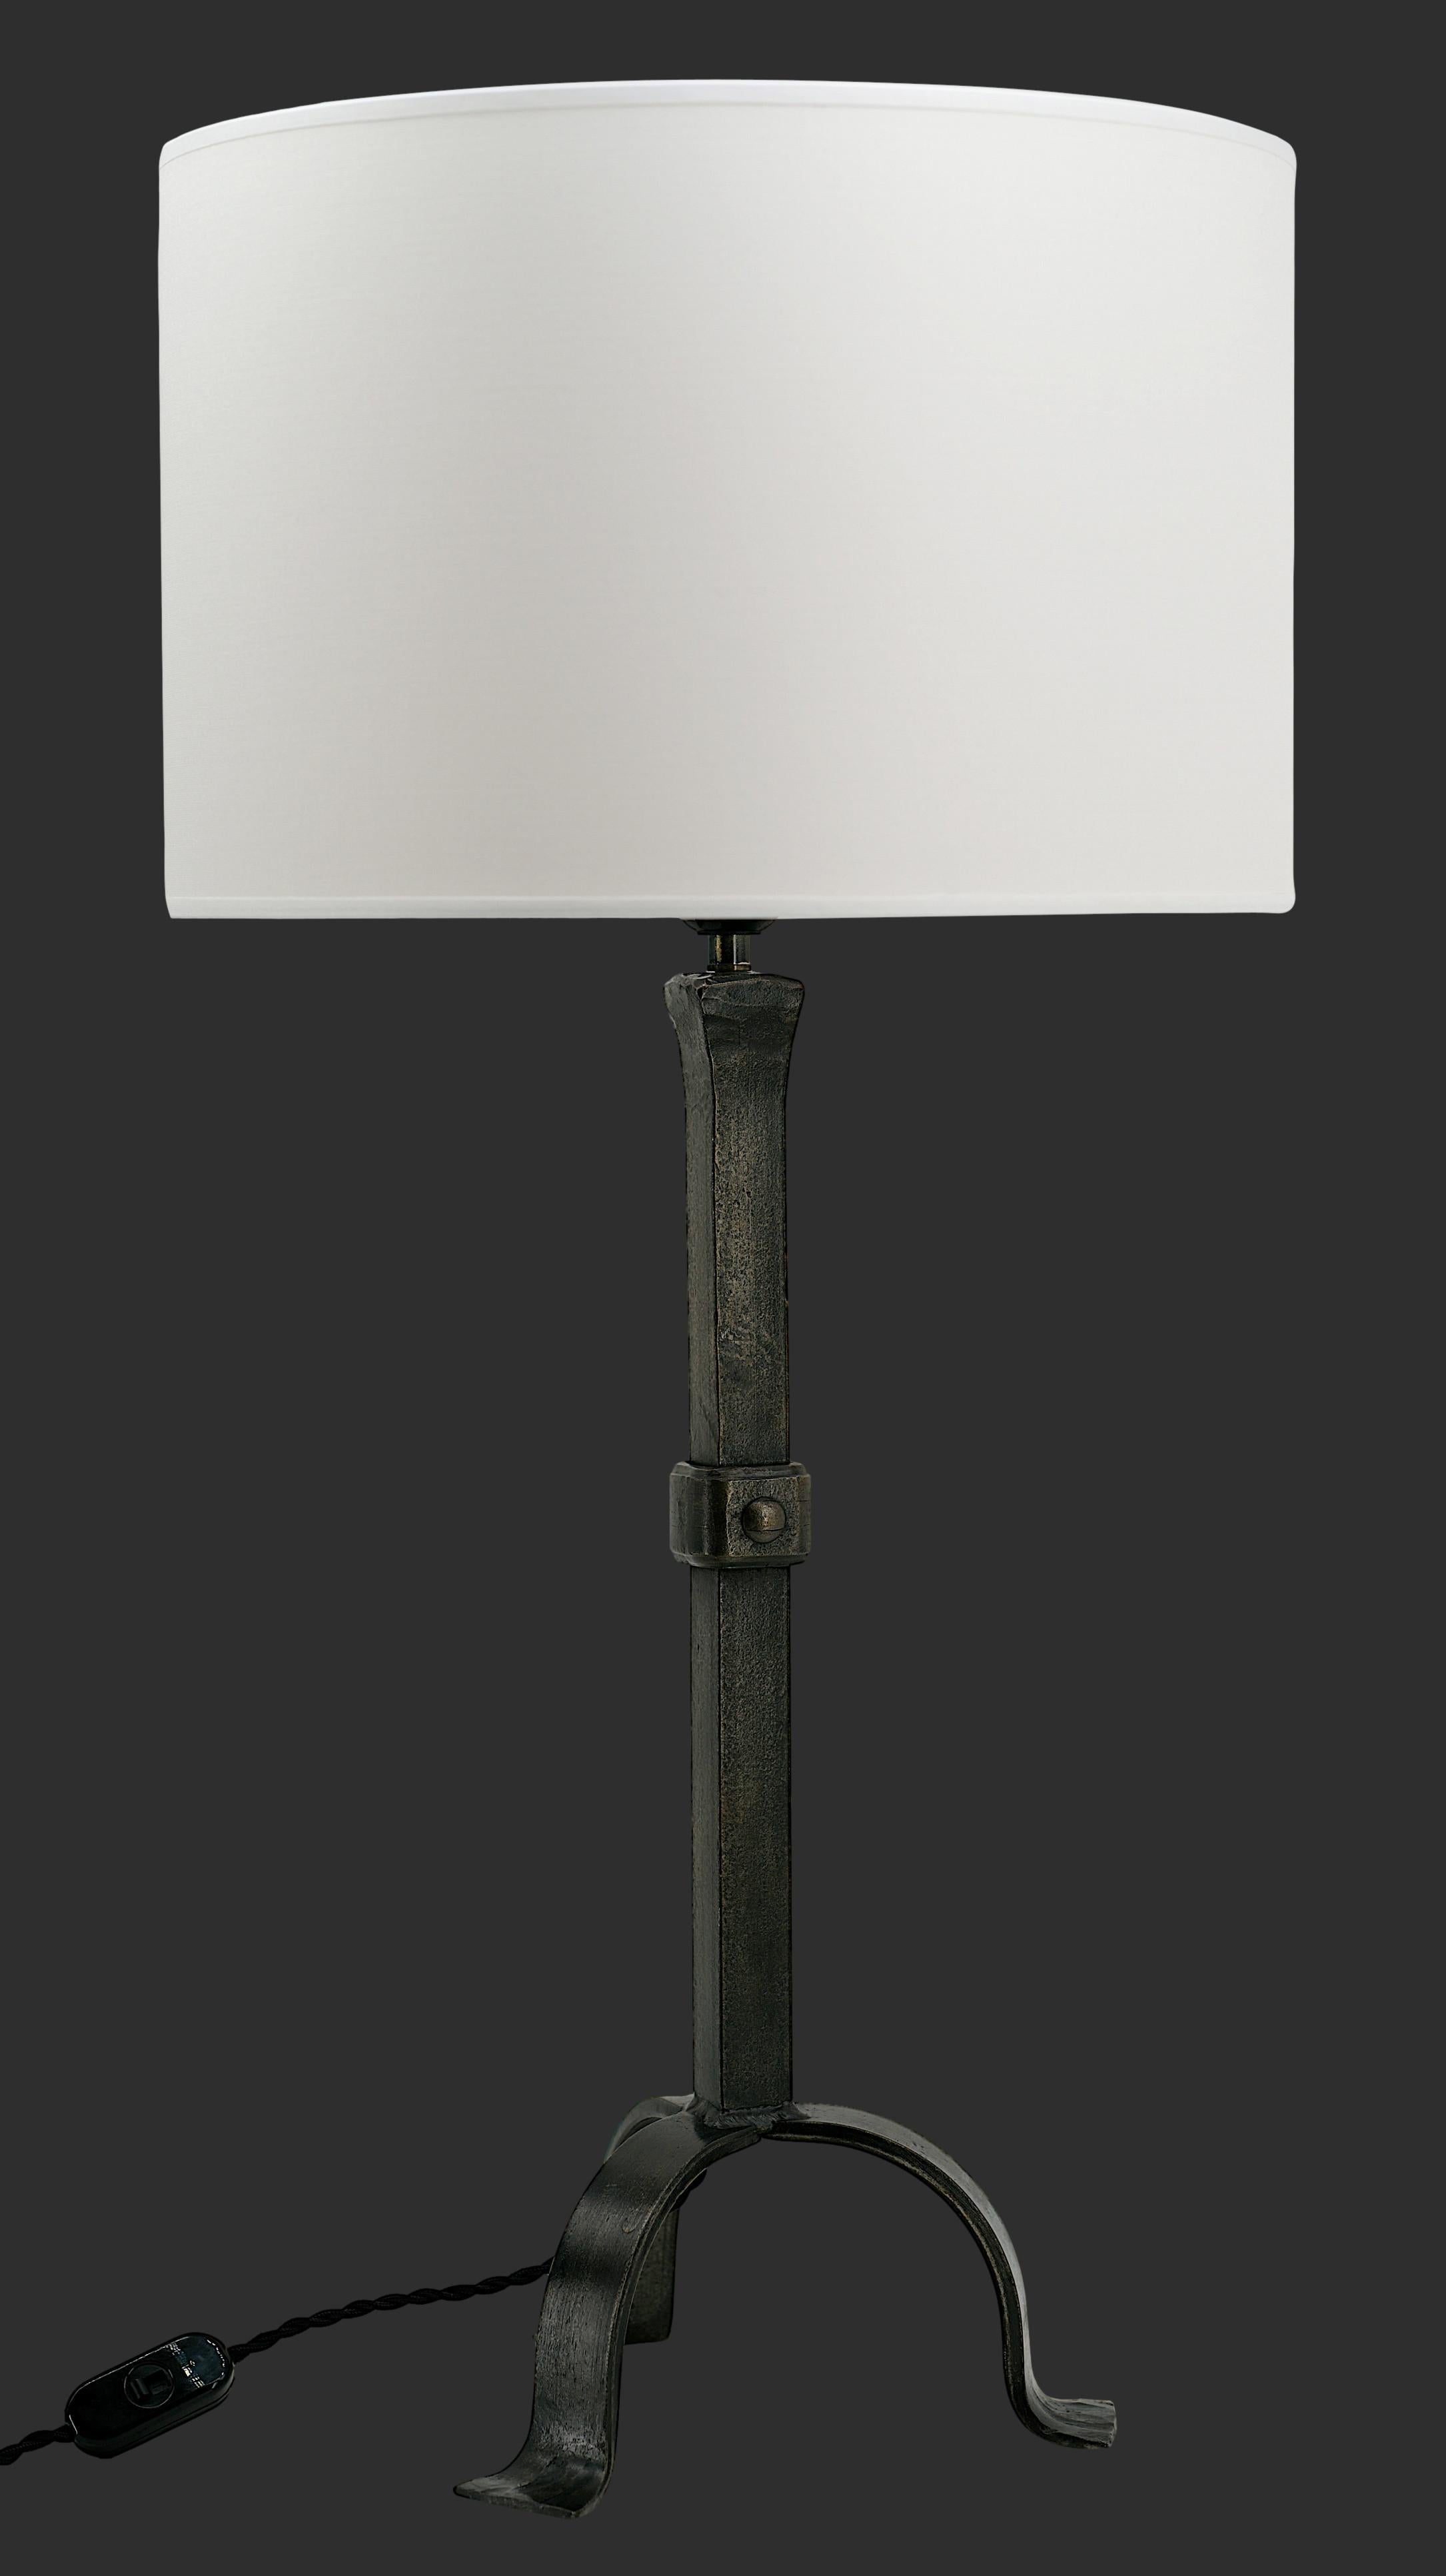 Large table lamp by Jean-Pierre RYCKAERT, Paris, ca.1950. Wrought-iron. Measurements without shade - Height with socket : 21